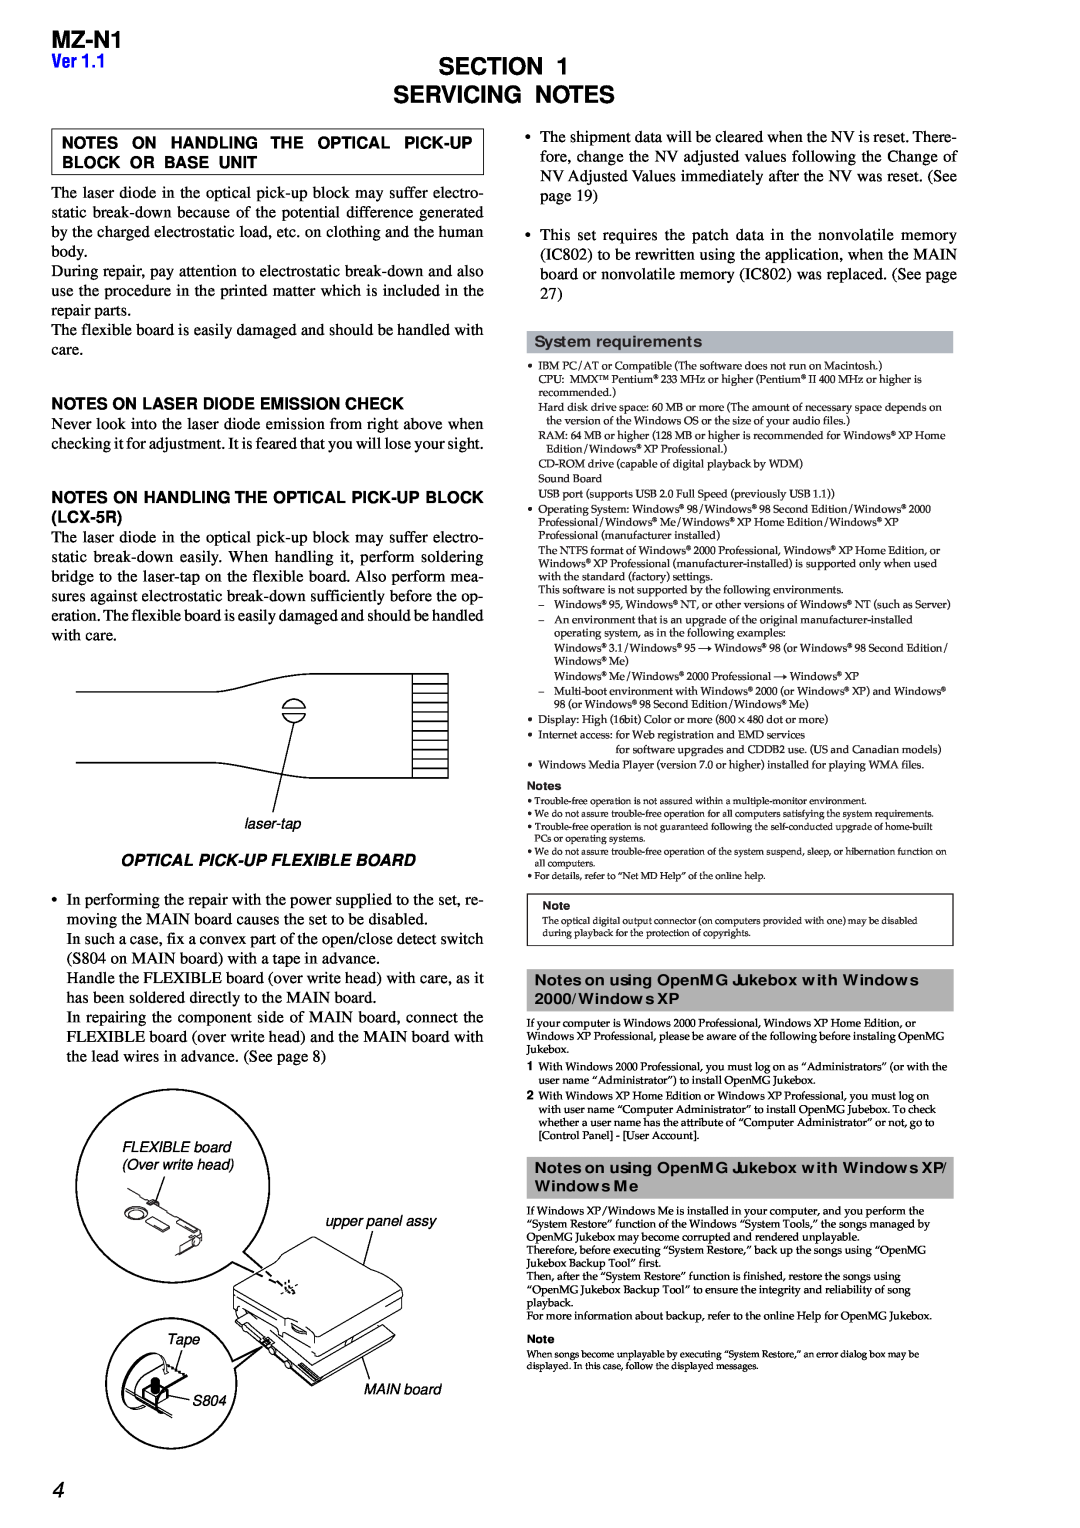 Sony MZ-N1 service manual Section, Servicing Notes, Notes On Laser Diode Emission Check, Optical Pick-Upflexible Board 